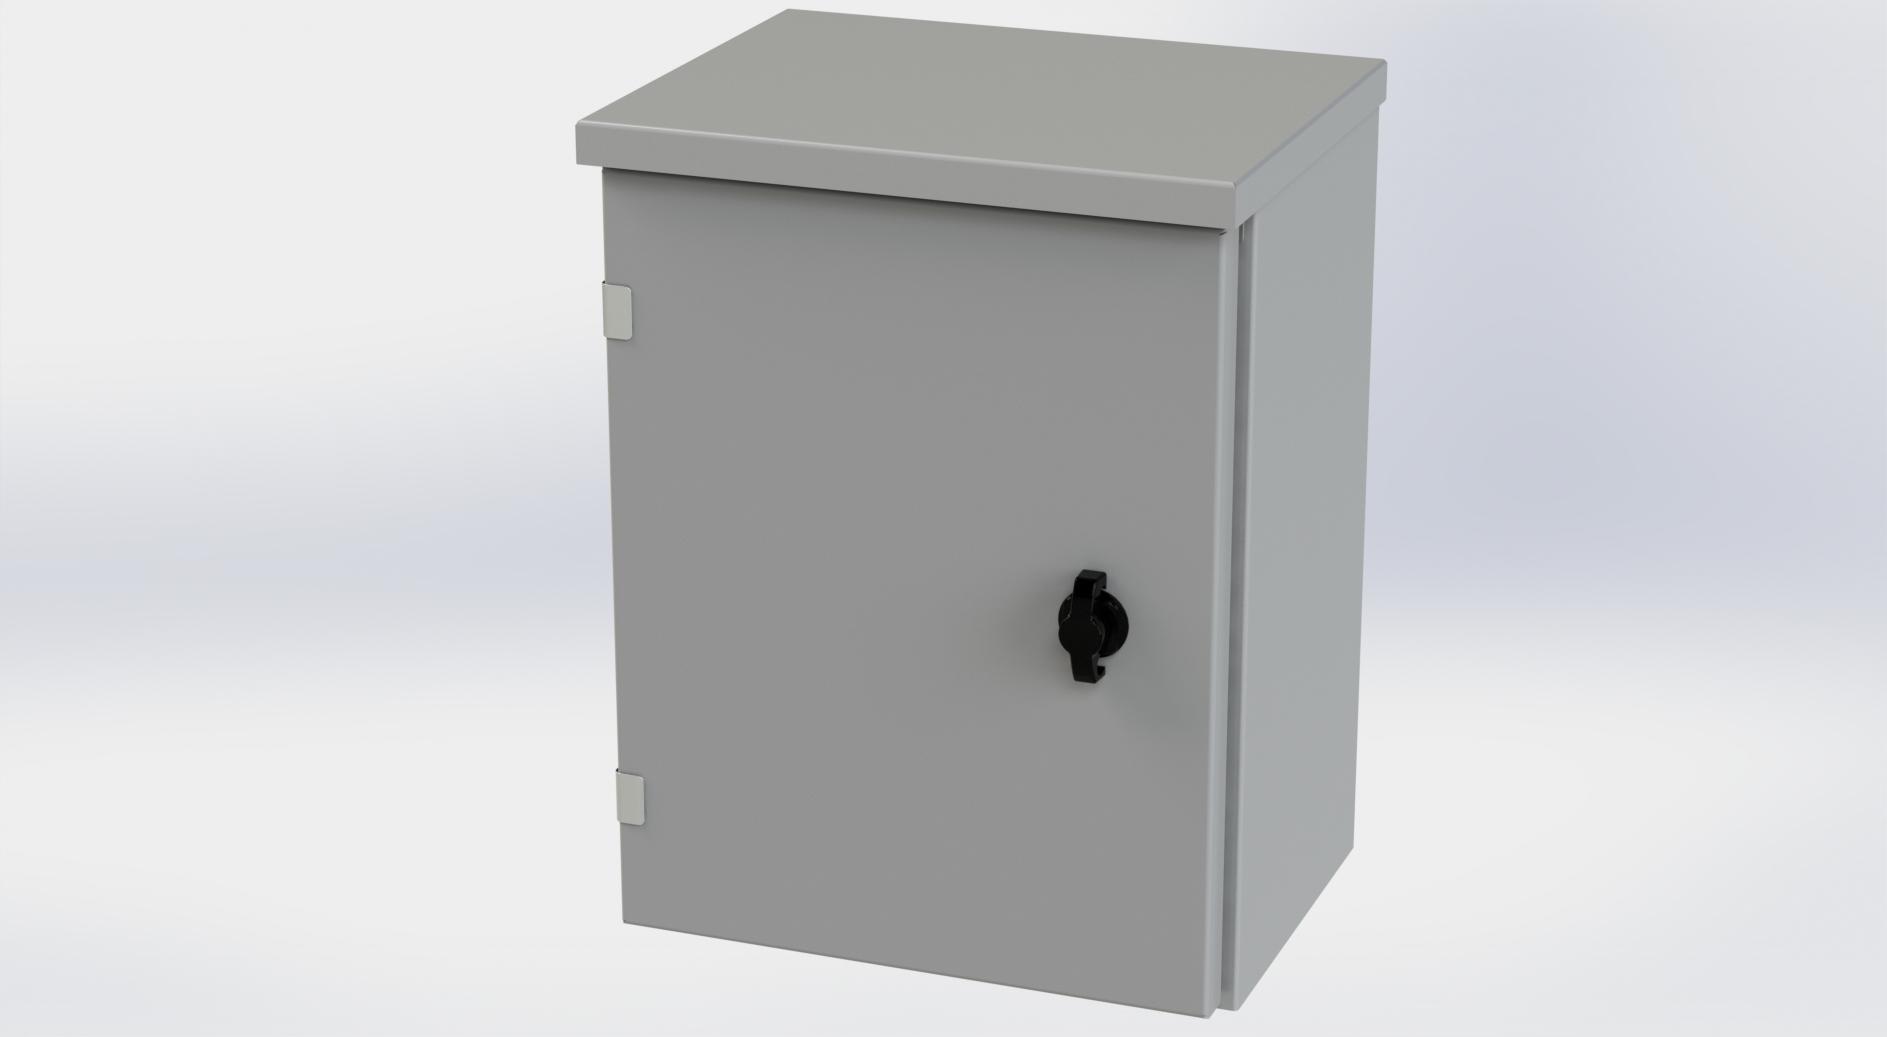 Saginaw Control SCE-16R1208LP Type-3R Hinged Cover Enclosure, Height:16.00", Width:12.00", Depth:8.00", ANSI-61 gray powder coating inside and out. Optional sub-panels are powder coated white.